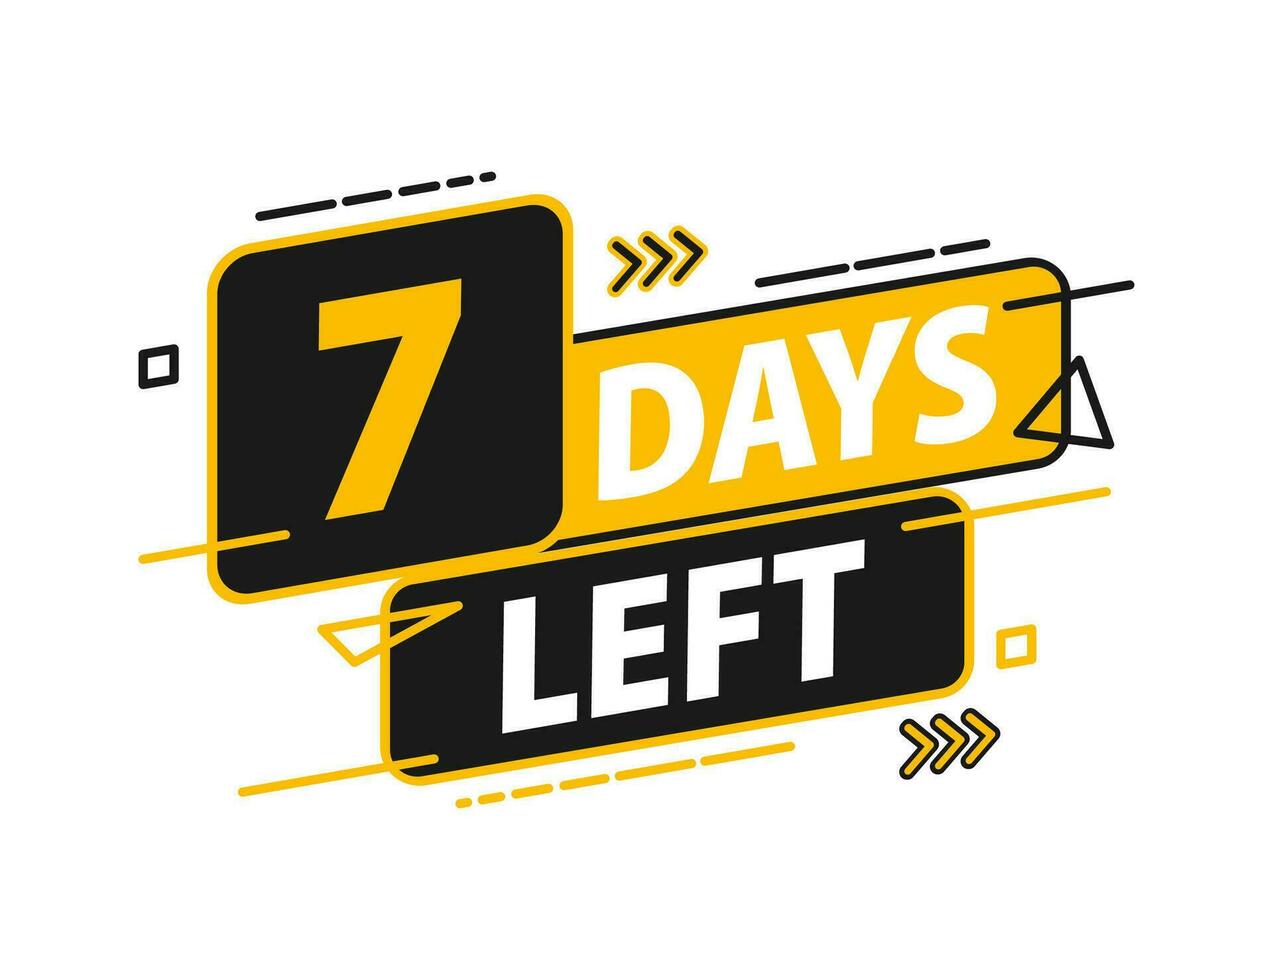 7 days left. Countdown discounts and sale time. 7 days left sign, label. Vector illustration